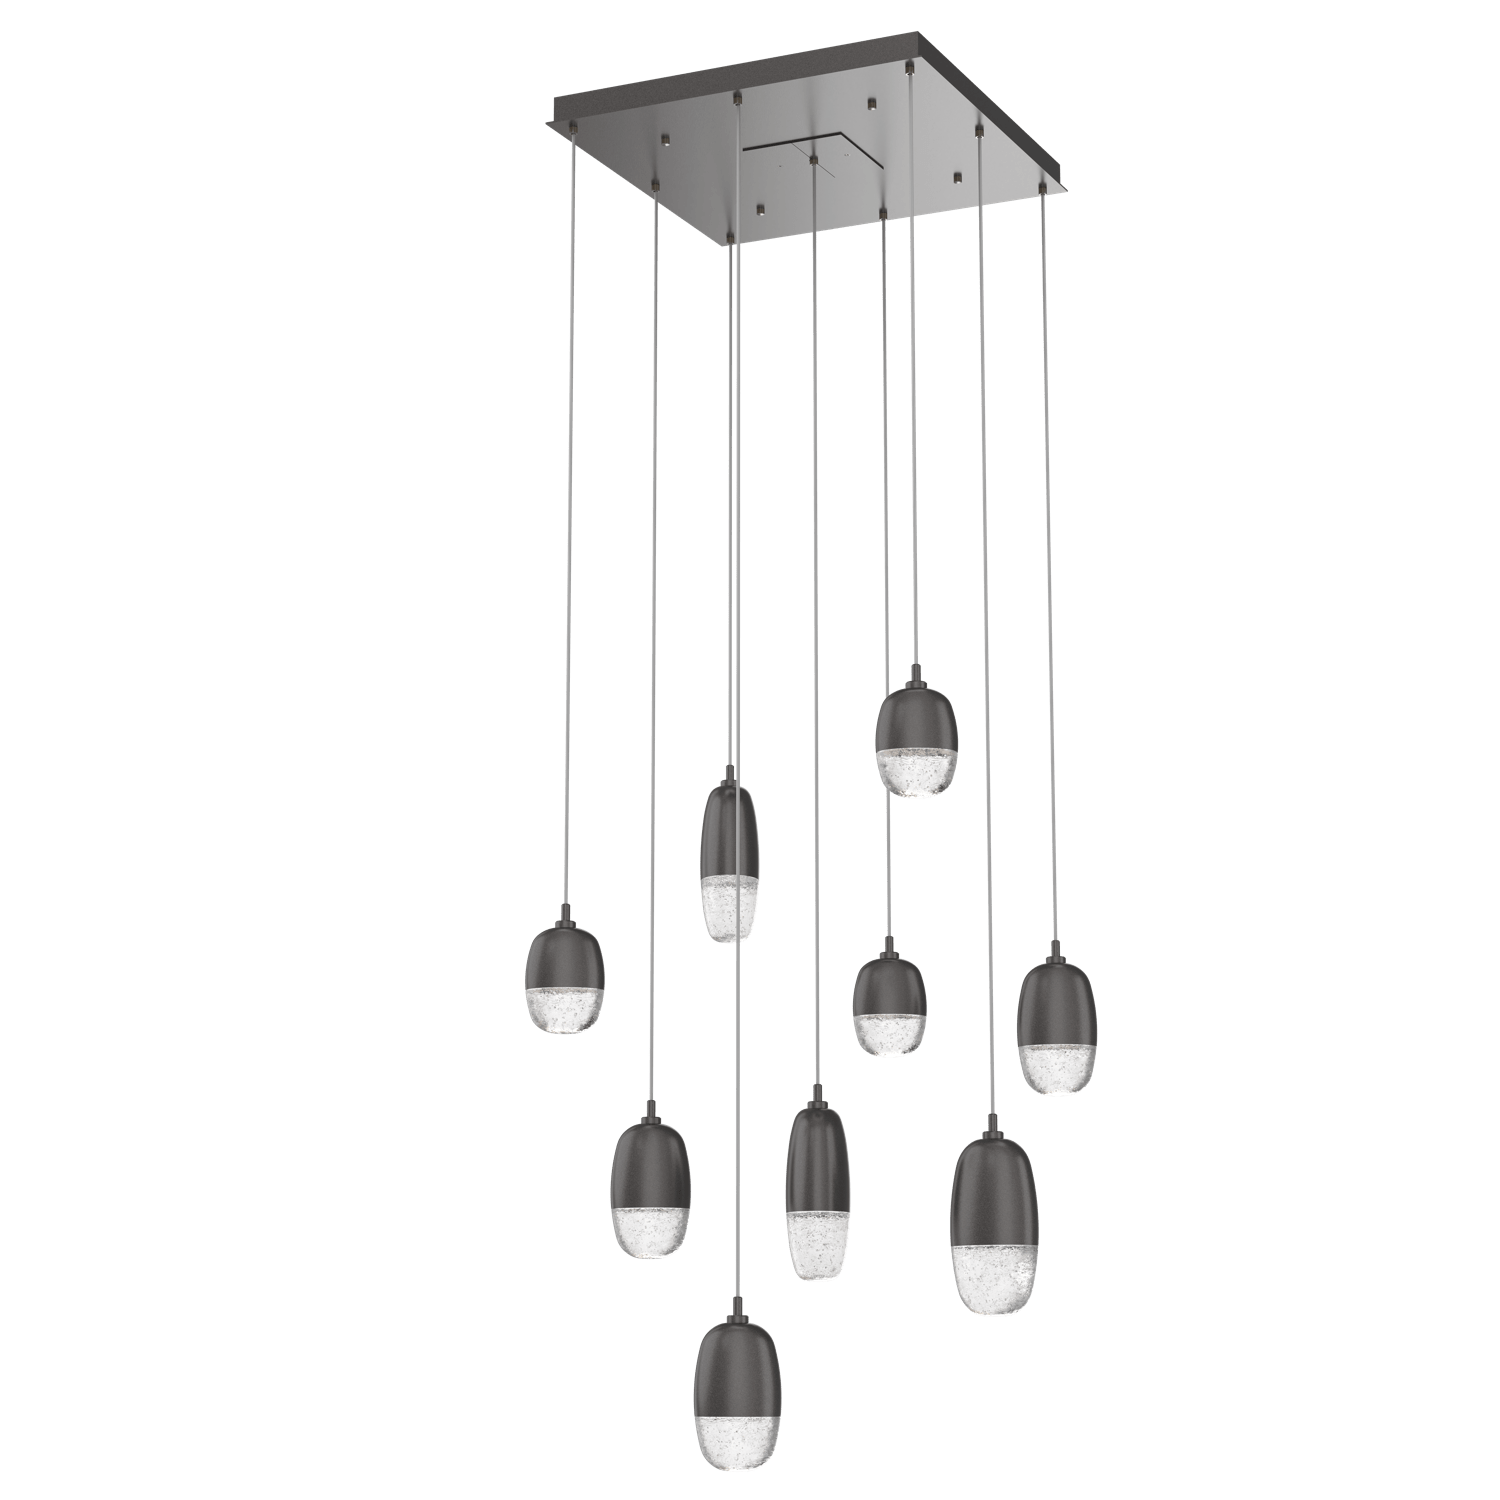 CHB0079-09-GP-Hammerton-Studio-Pebble-9-light-square-pendant-chandelier-with-graphite-finish-and-clear-cast-glass-shades-and-LED-lamping